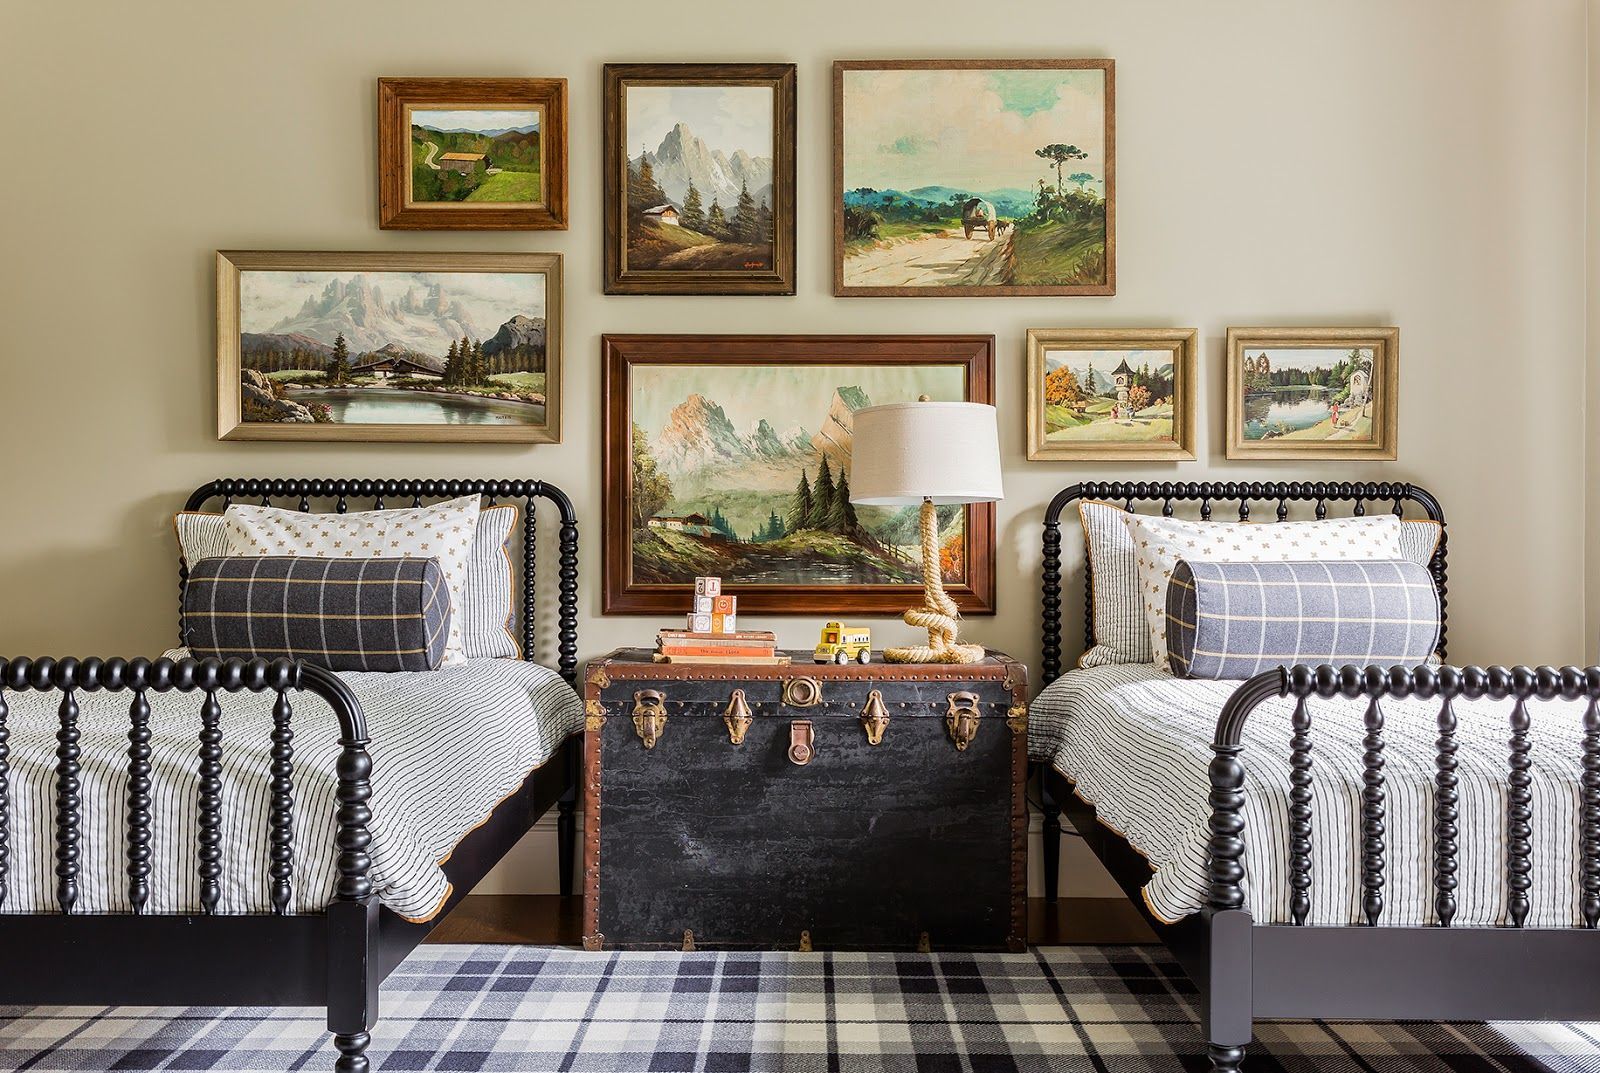 Cute room – love the Jenny Lind beds, trunk and plaid rug, swap the art for something more fun and its a great kids room!